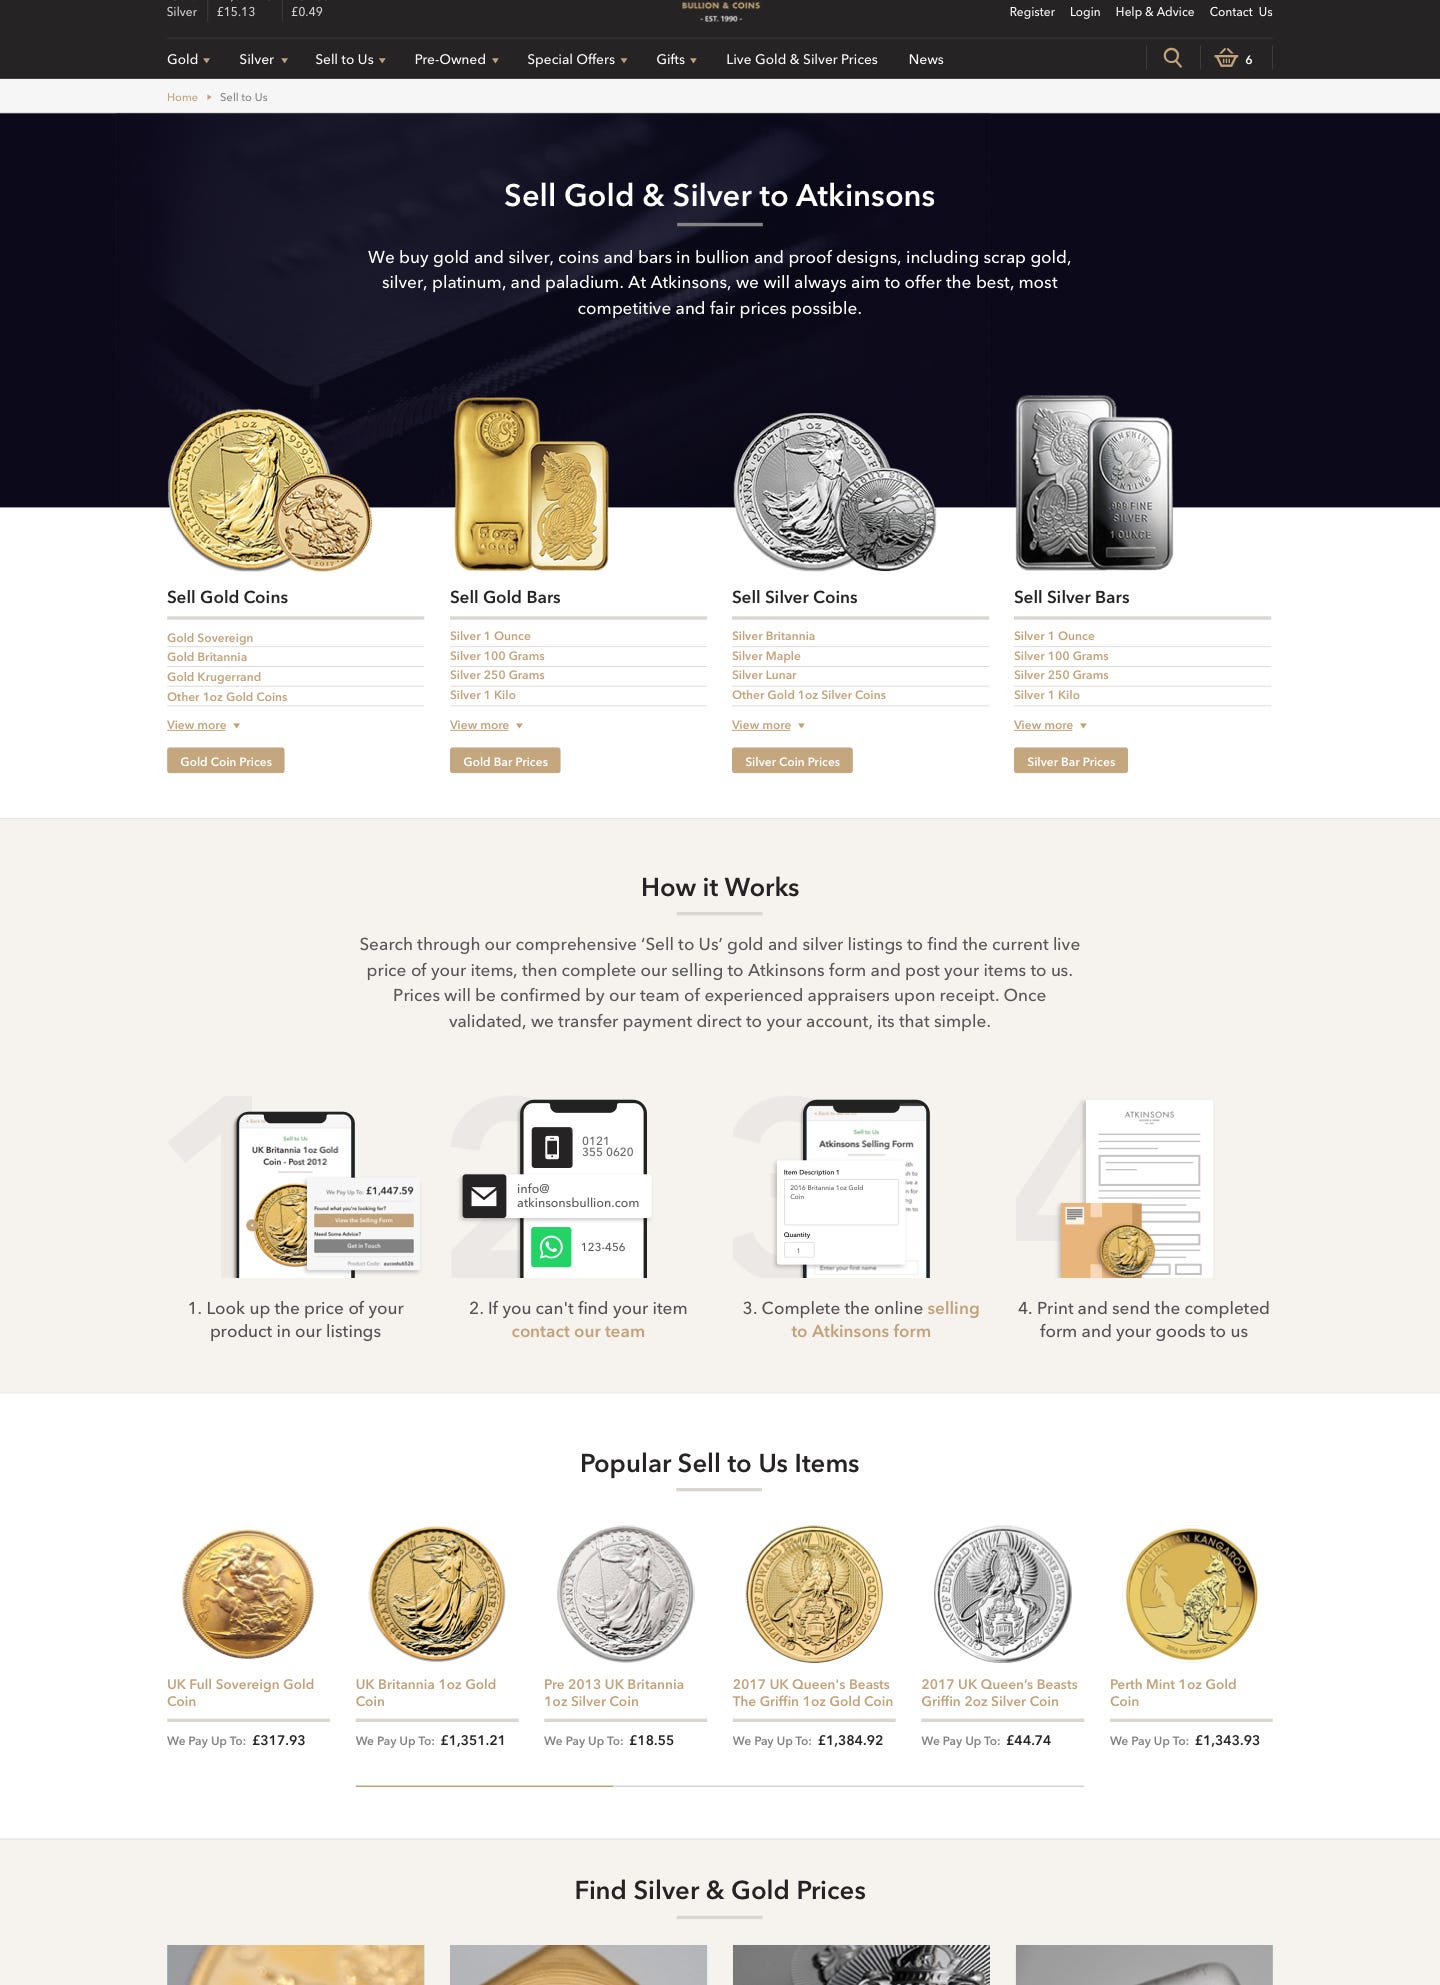 Sell gold and silver page design